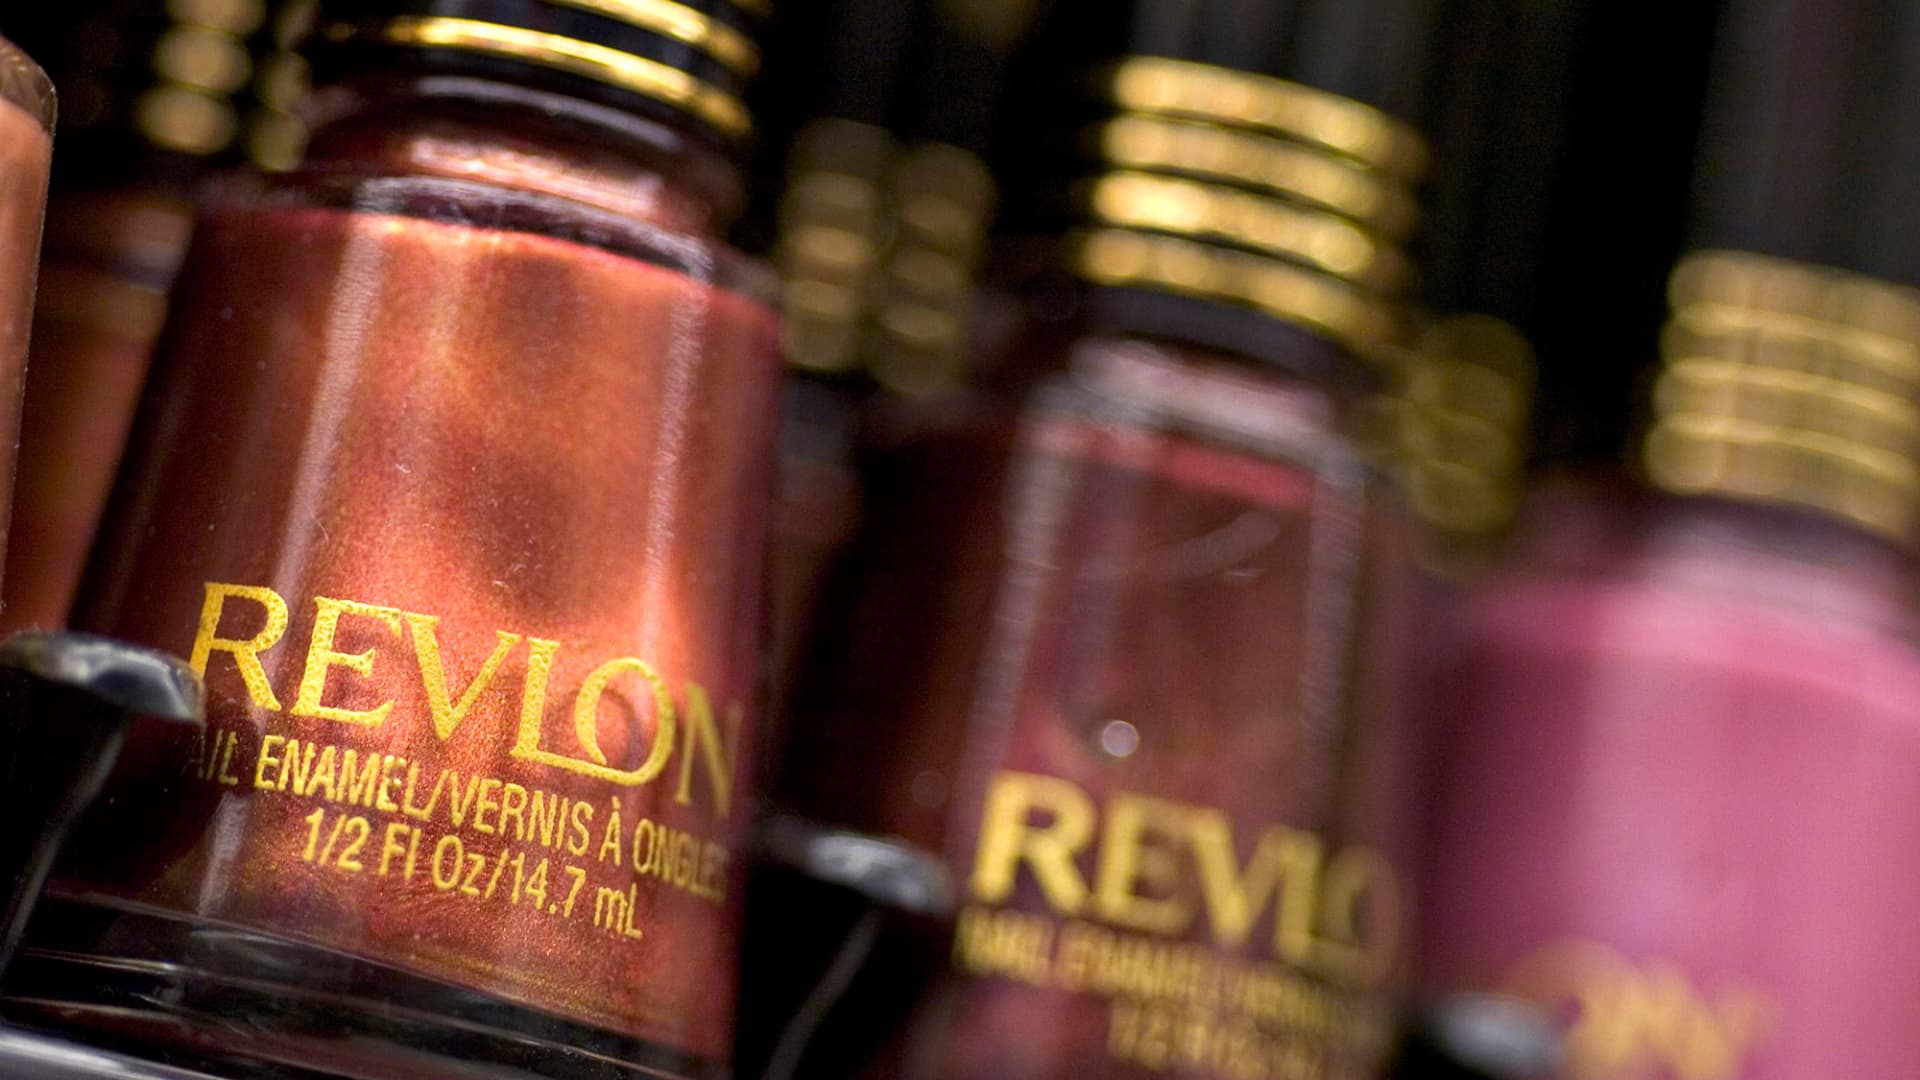 Revlon files for Chapter 11 bankruptcy protection